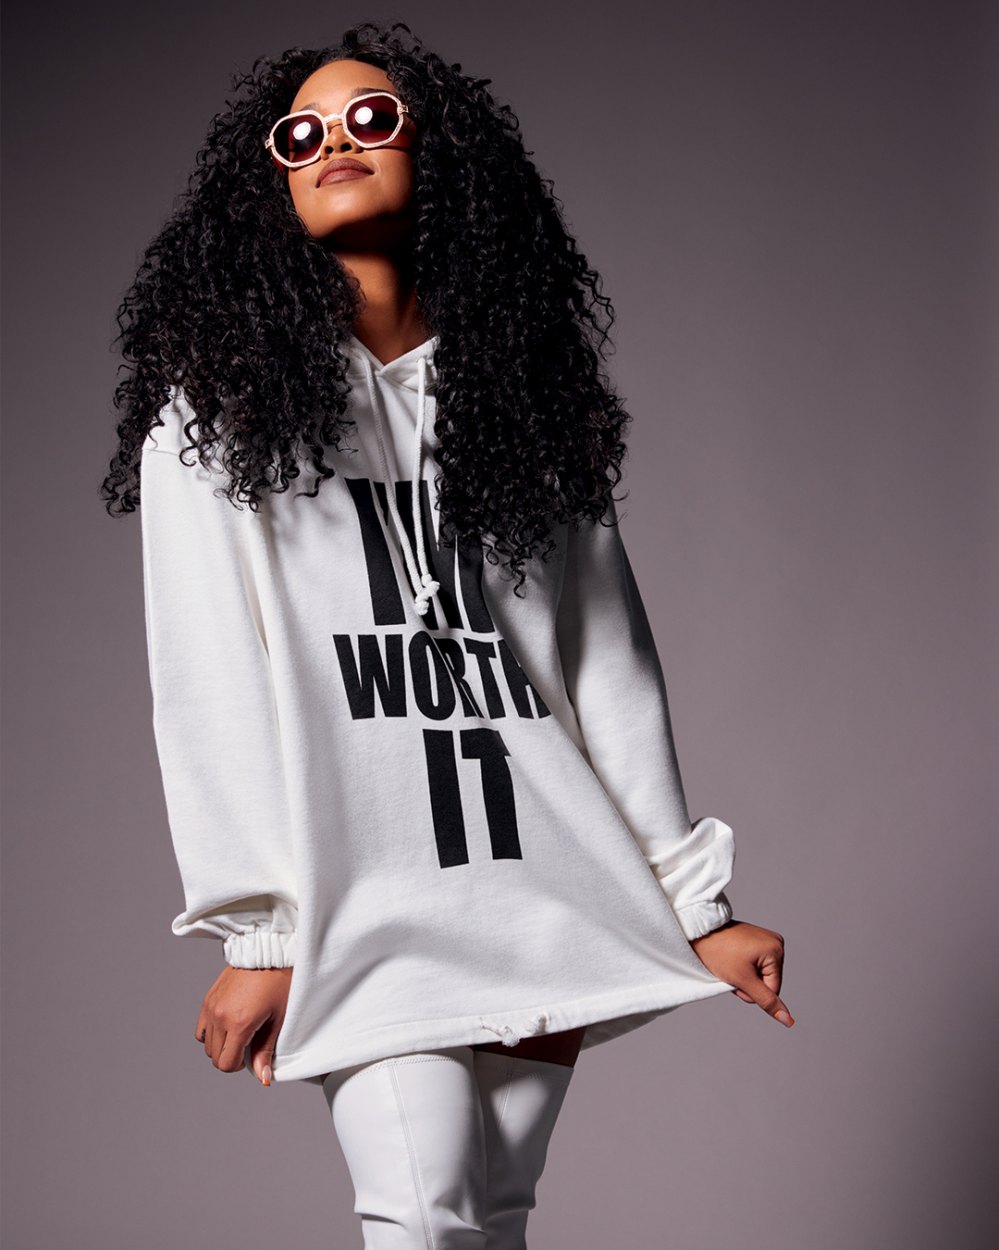 H.E.R. Is ‘Beyond Happy’ to Be L’Oreal’s New Global Ambassador: ‘I Can’t Wait’